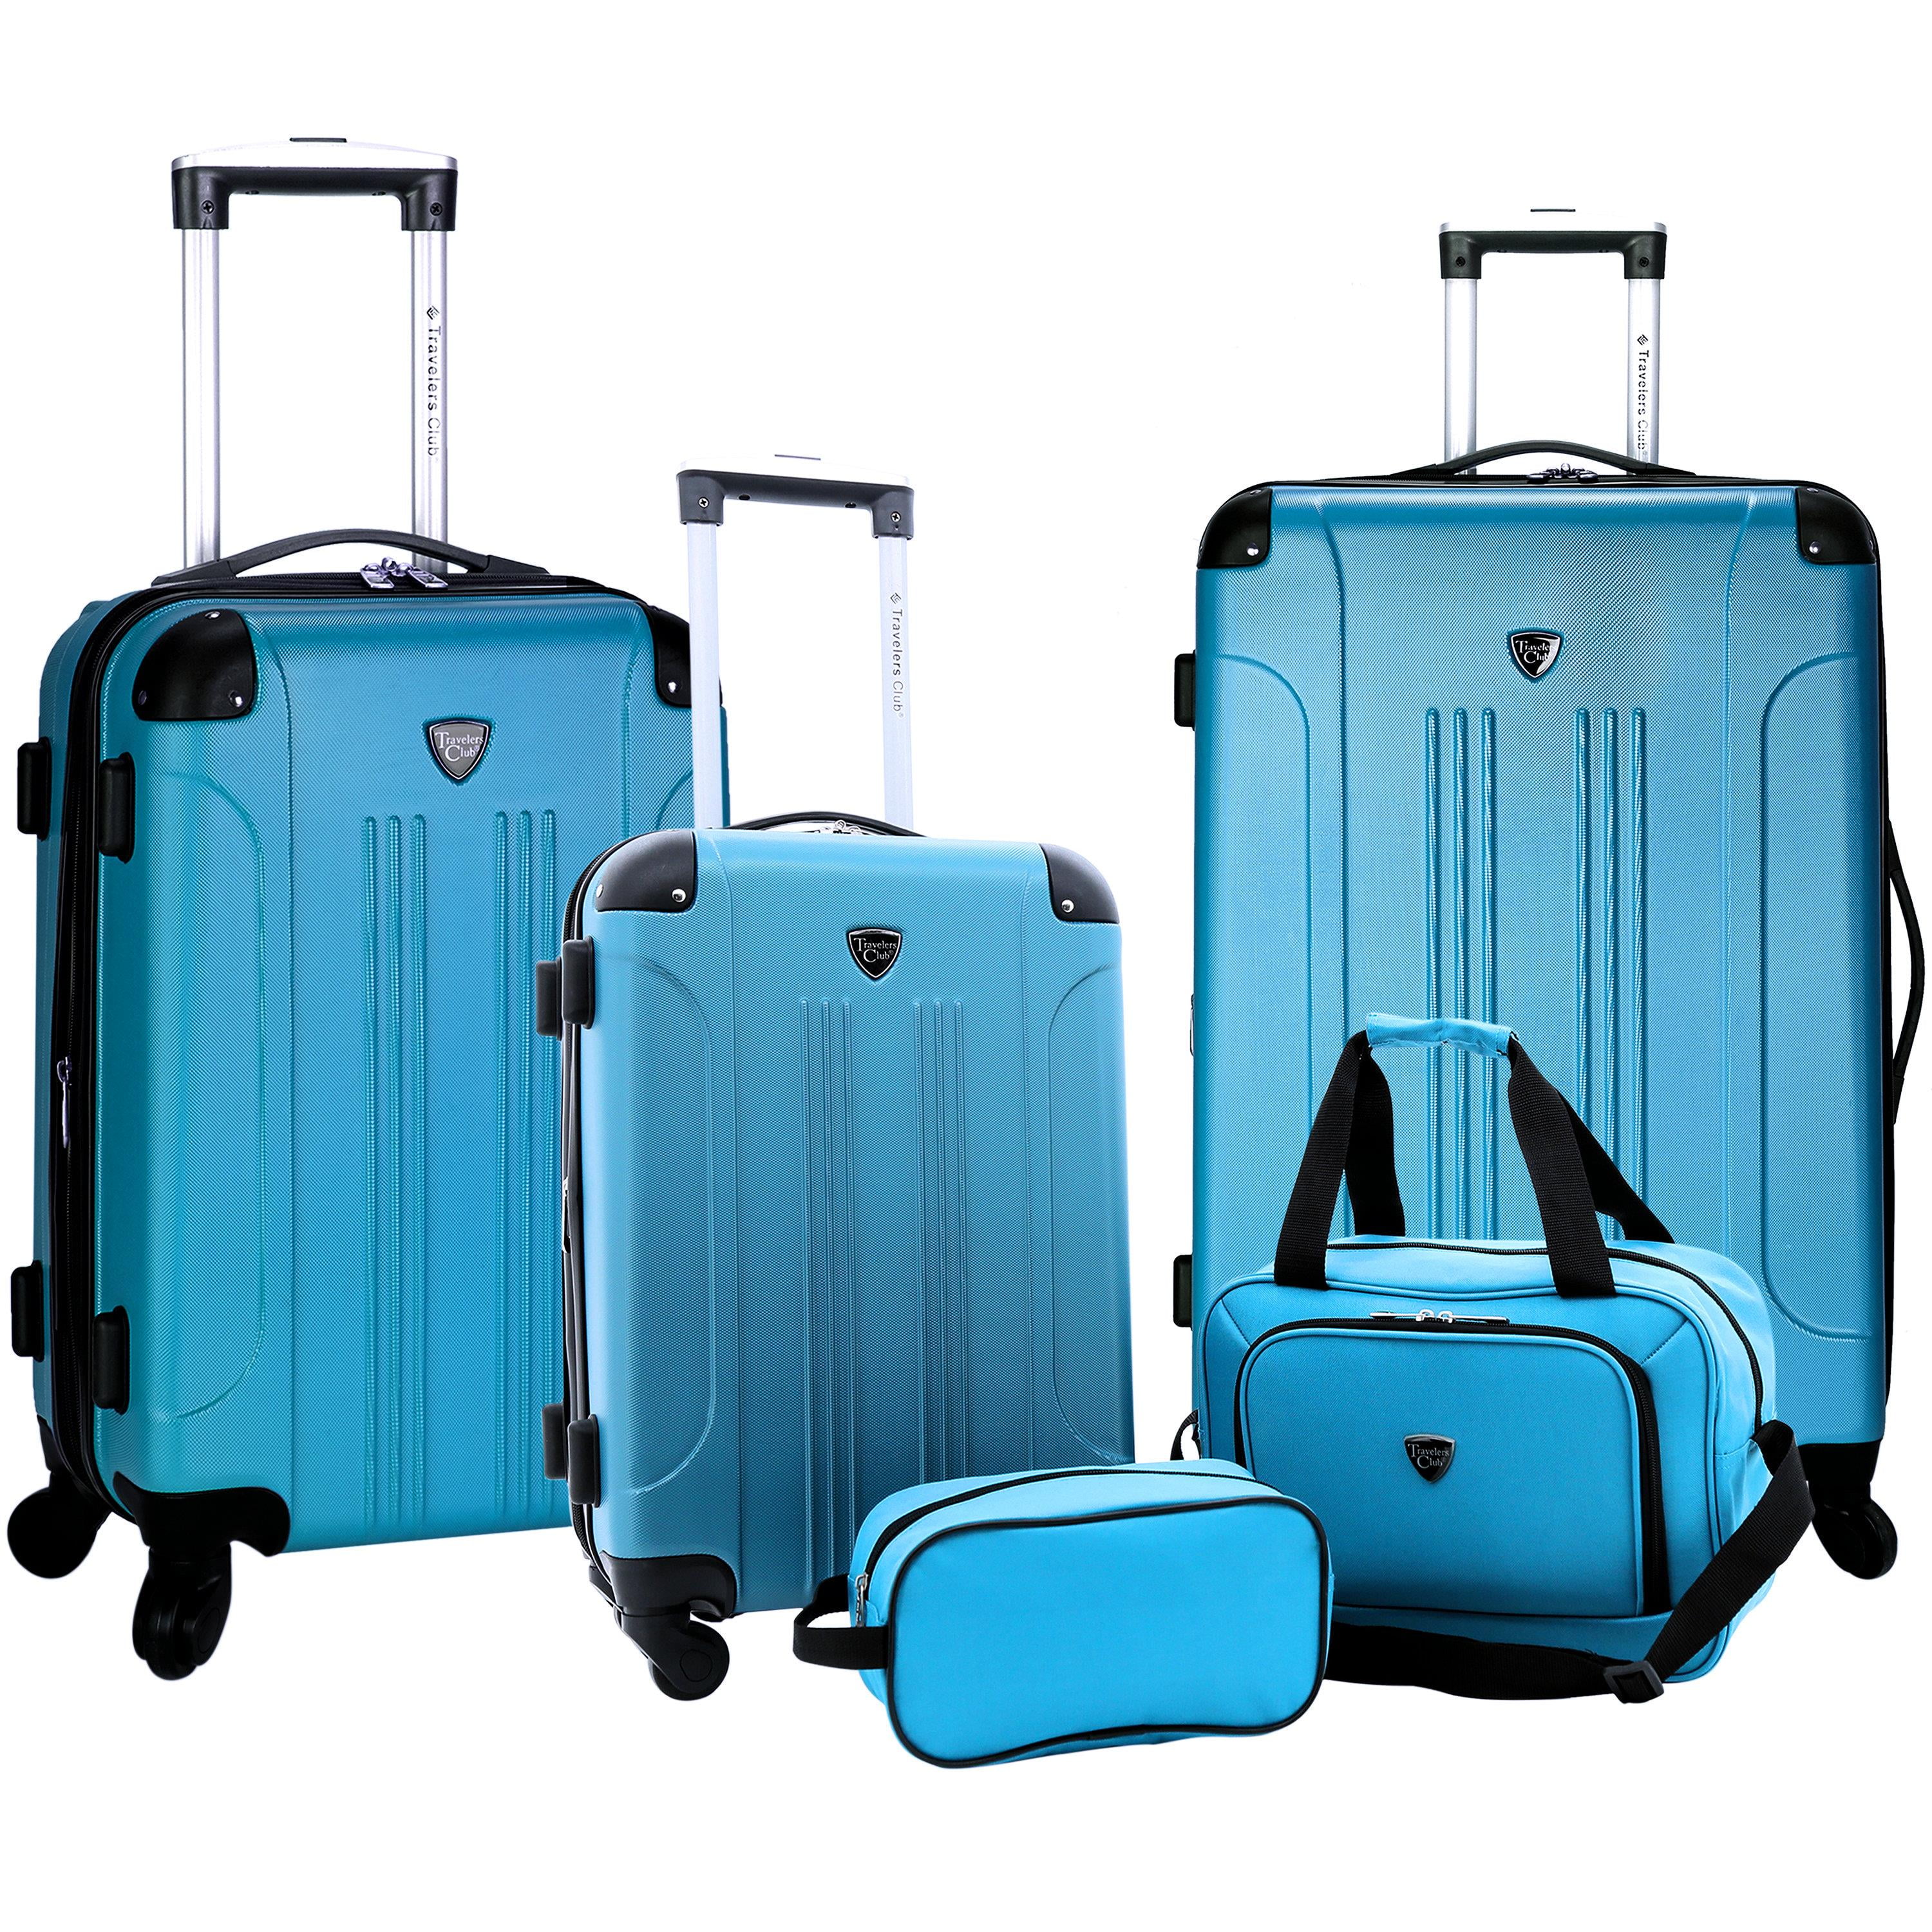 Travelers Club Chicago Plus Carry-On Luggage and Accessories Set With Tote  and Travel kit-Color:Teal,Size:5 Piece 